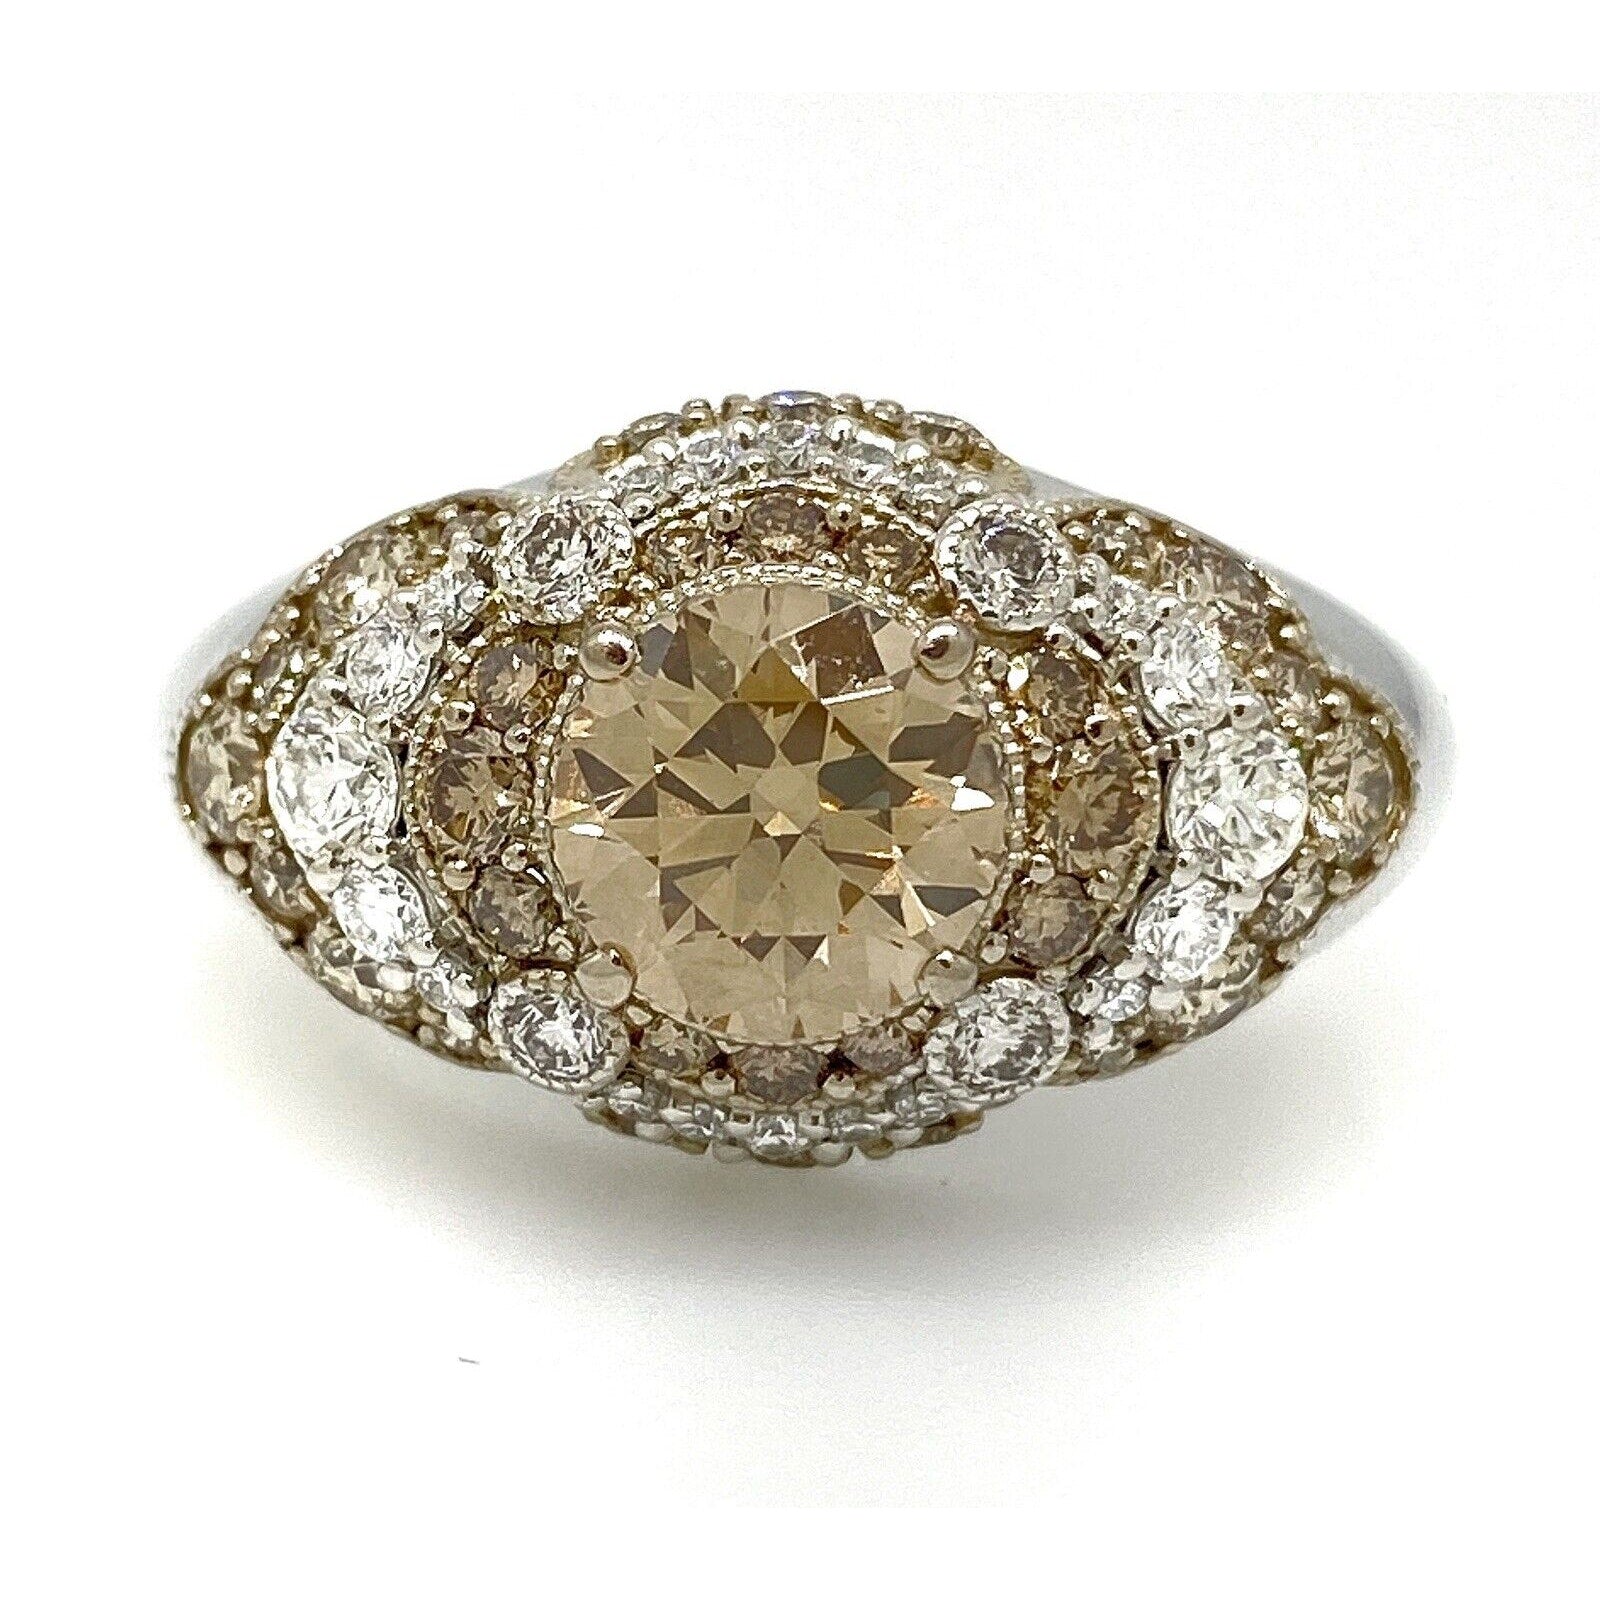 Champagne Diamond Solitaire Ring with Pave Diamonds in Platinum and 18k Gold